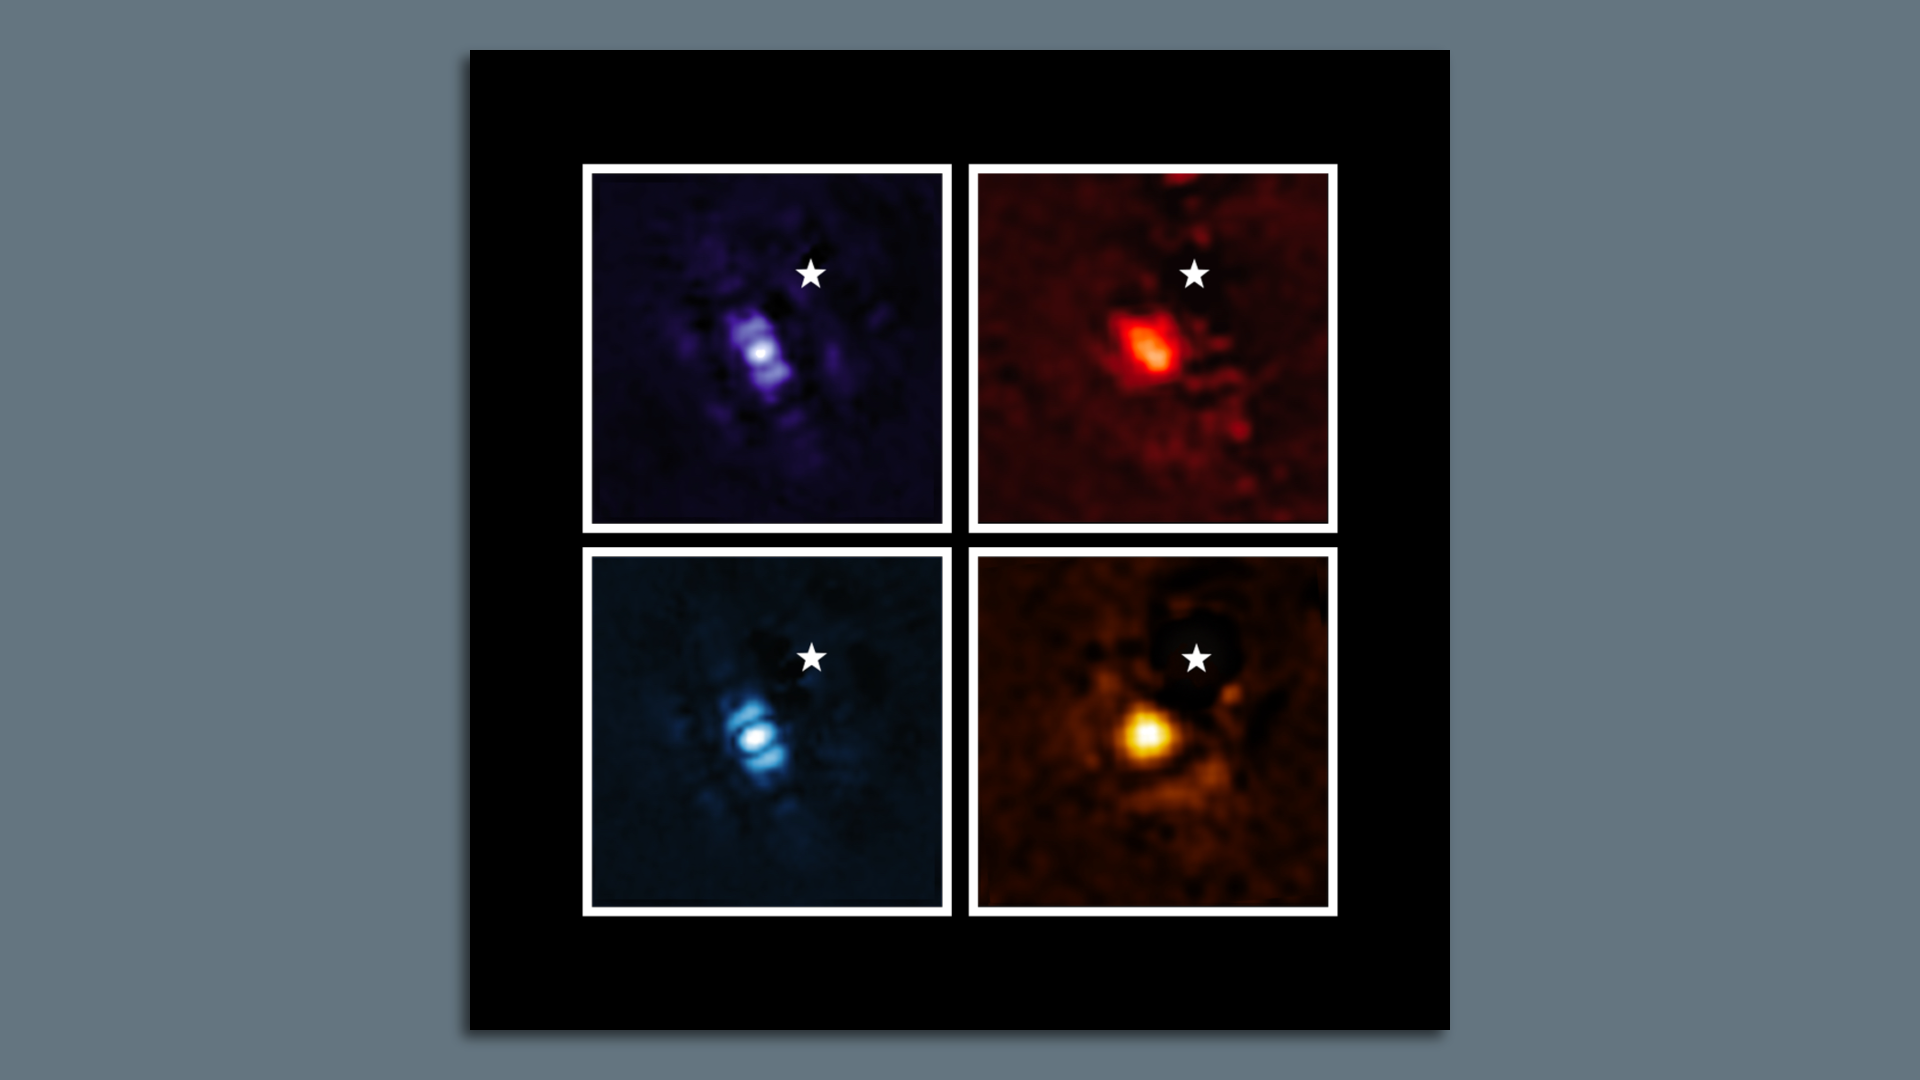 Exoplanet HIP 65426 b in different bands of infrared light. The star indicates the location of the planet's host star. Credit: NASA/ESA/CSA, A Carter (UCSC), the ERS 1386 team, and A. Pagan (STScI)